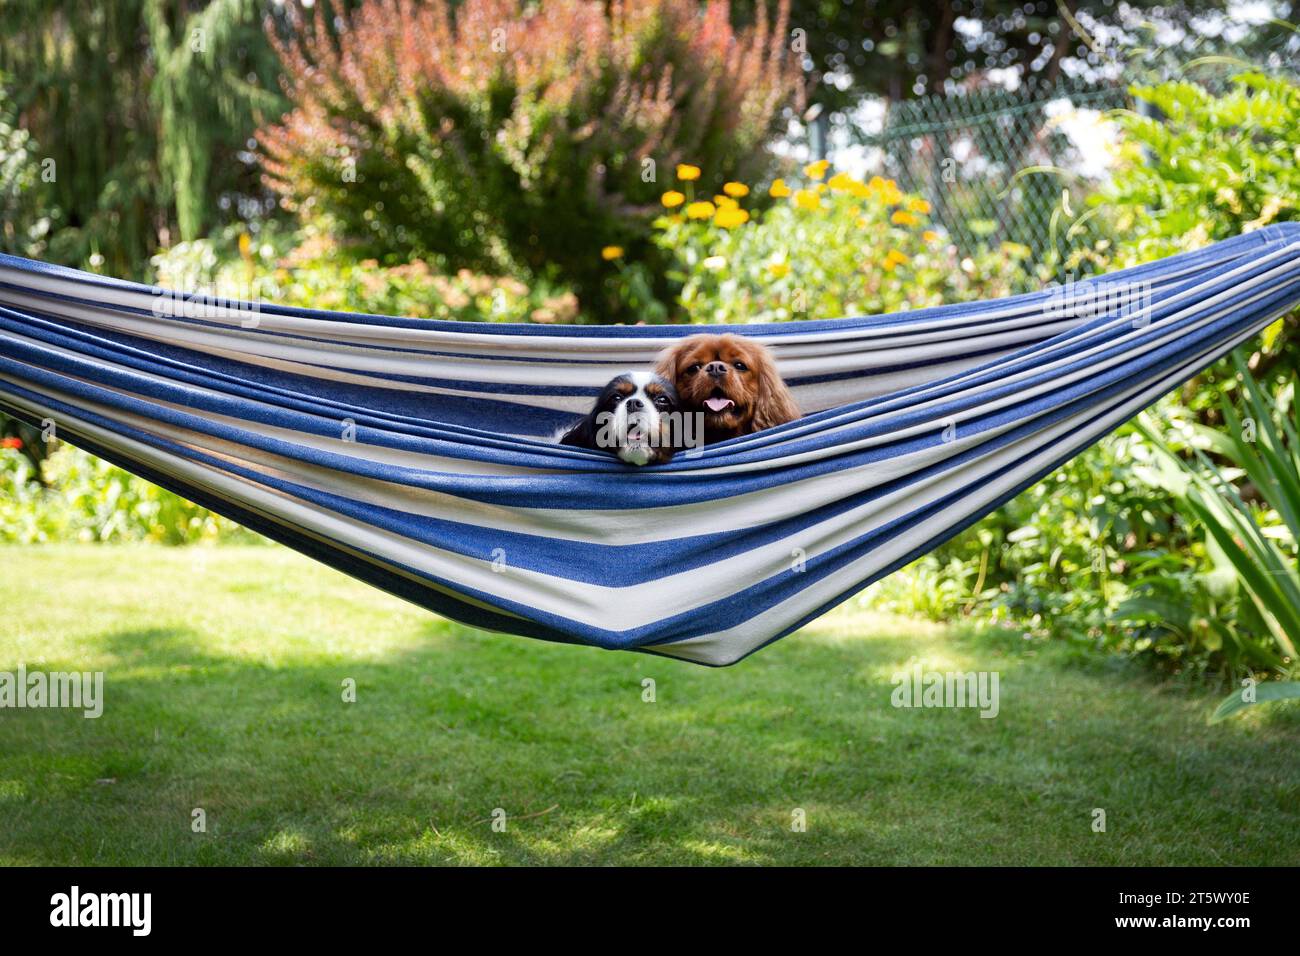 Two cute dogs relaxing in a hammock suspended in the garden Stock Photo